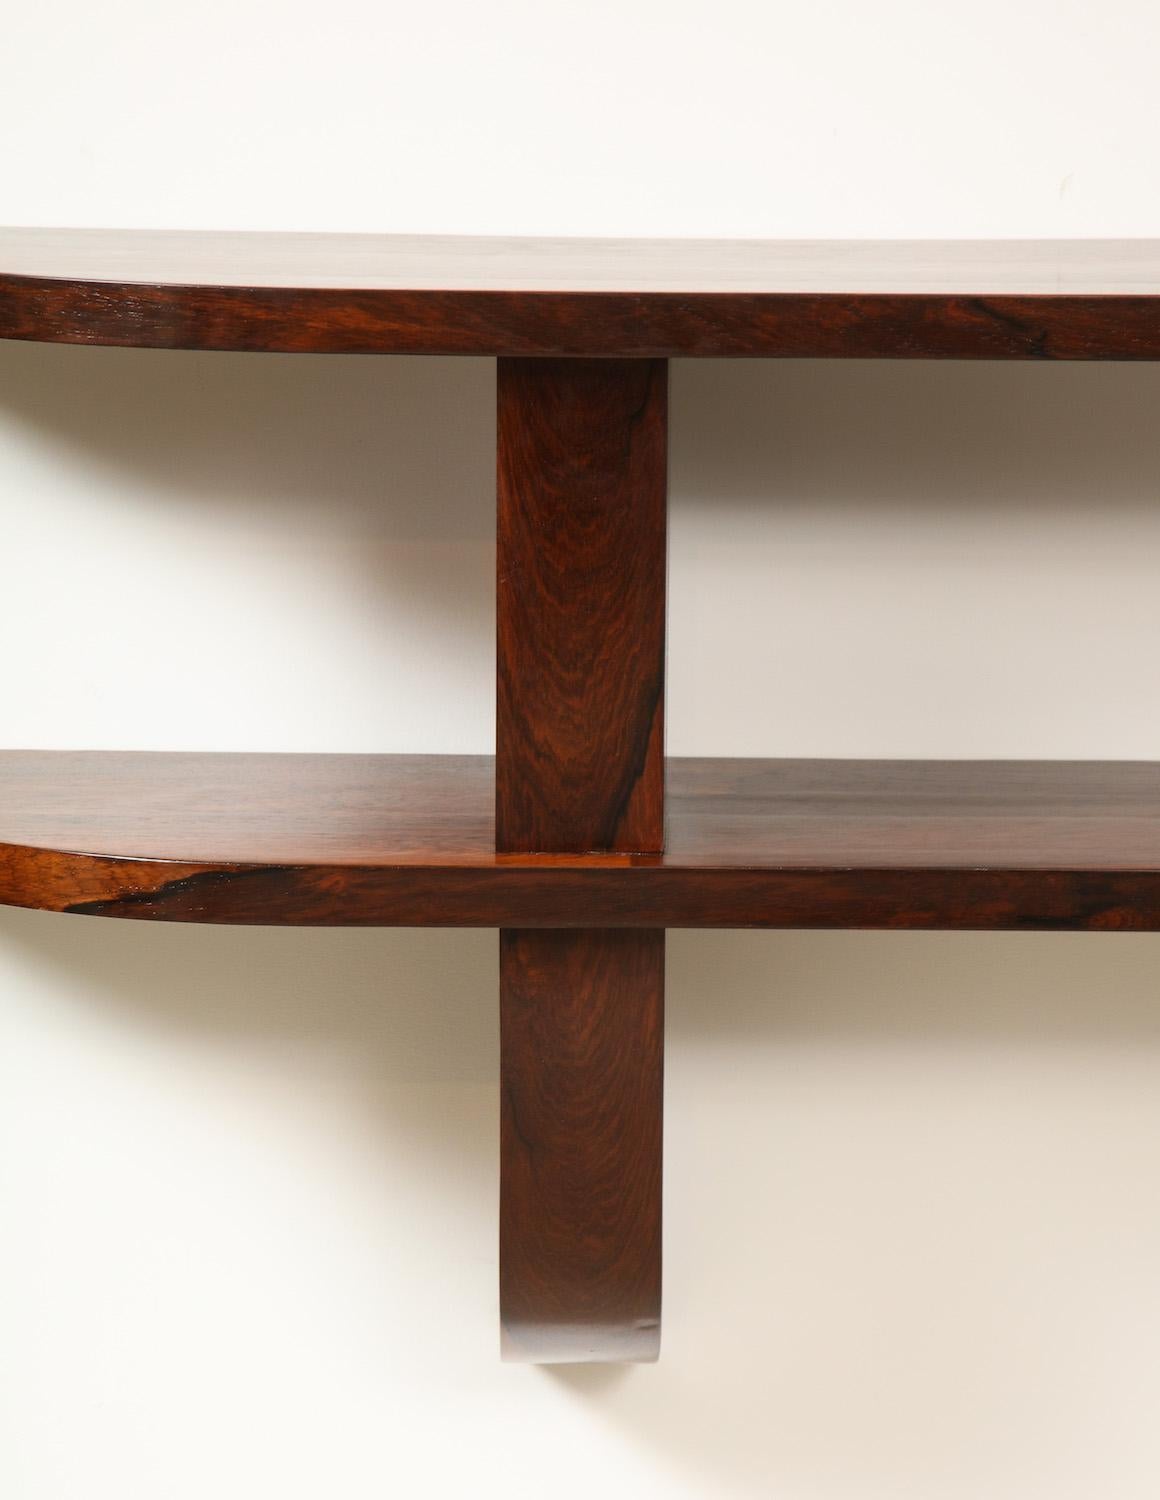 Architectural open shelf of rosewood. Easy mounting system on rear. Recently refinished.